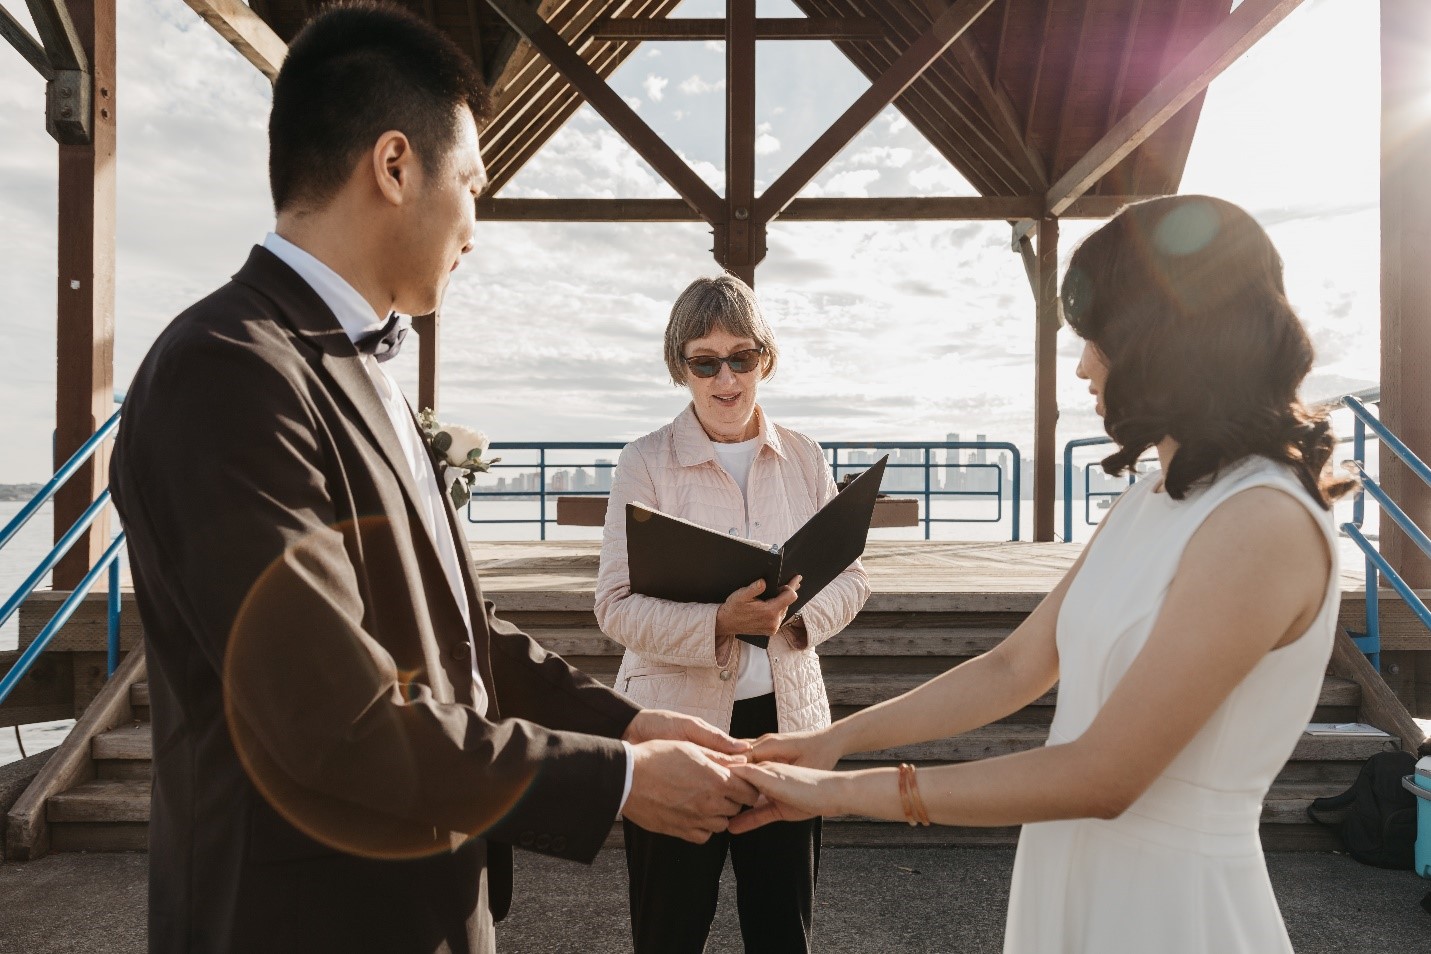 Small Talk Before You Have a Chat With The Wedding Officiant